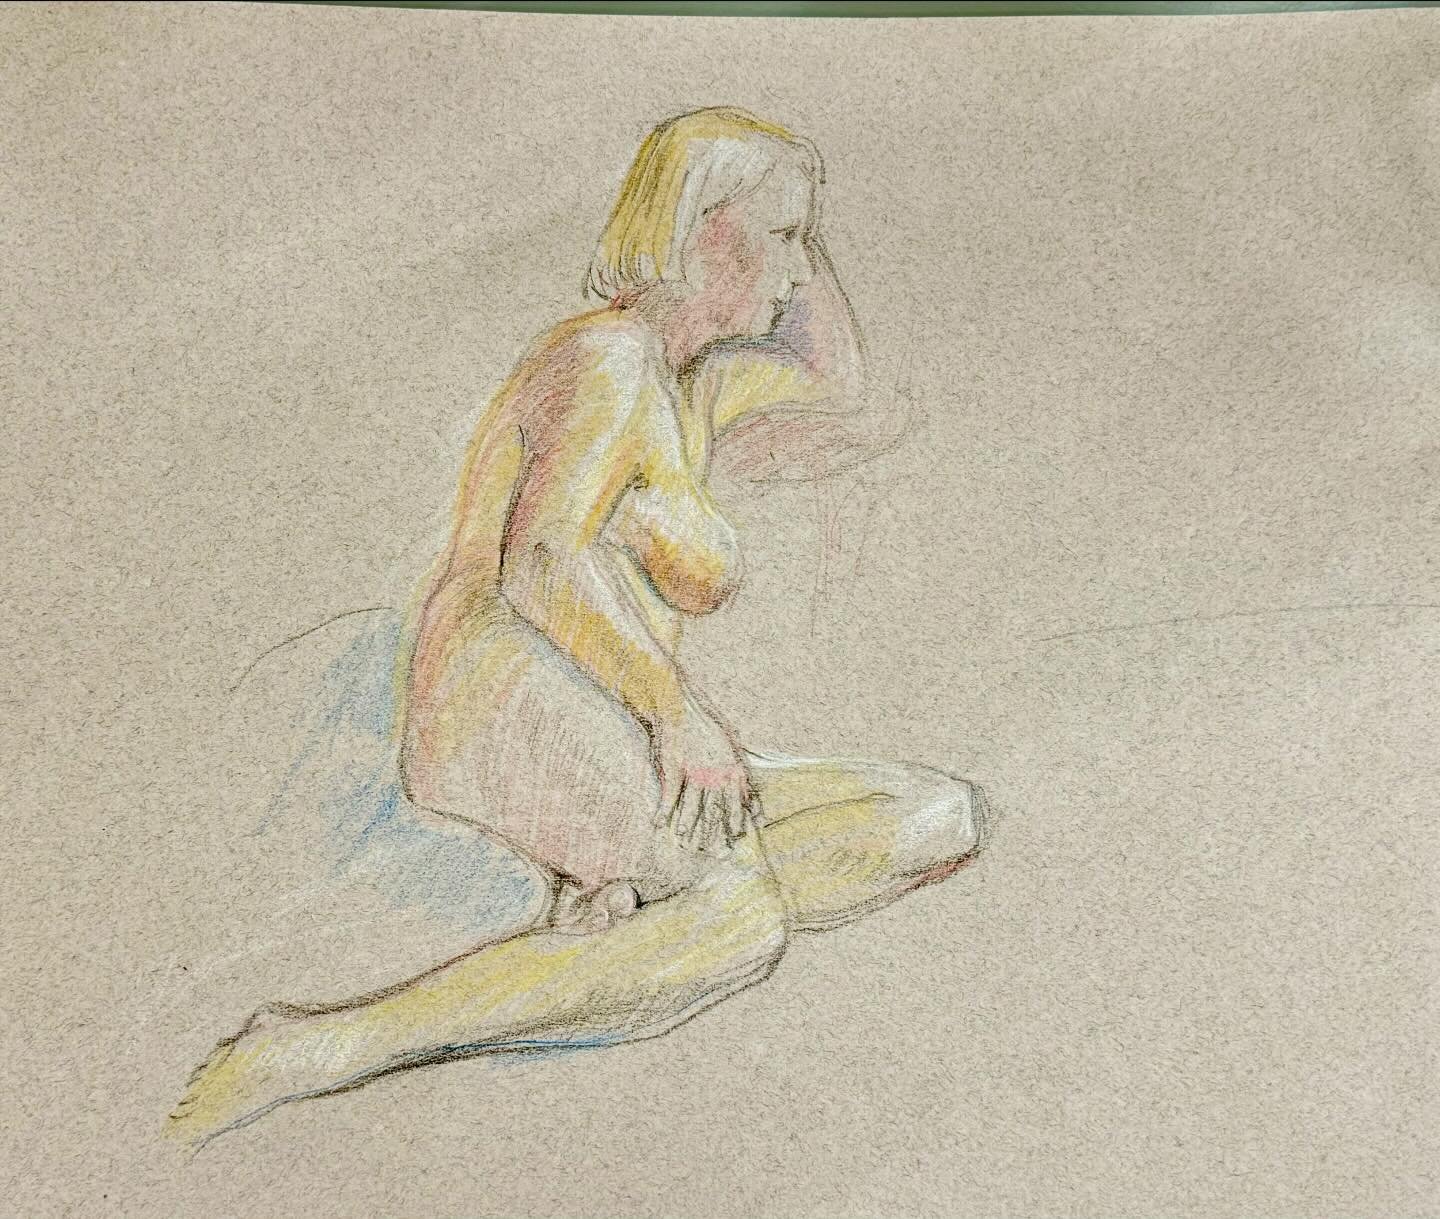 Thursday evening we held another life-drawing session with @liah.edwardes who was kind enough to model. Poses were 5,10 and 20 - minutes. But that was long enough to see some fantastic, well -observed drawing from our members. 
#hallamartgroup #lifed